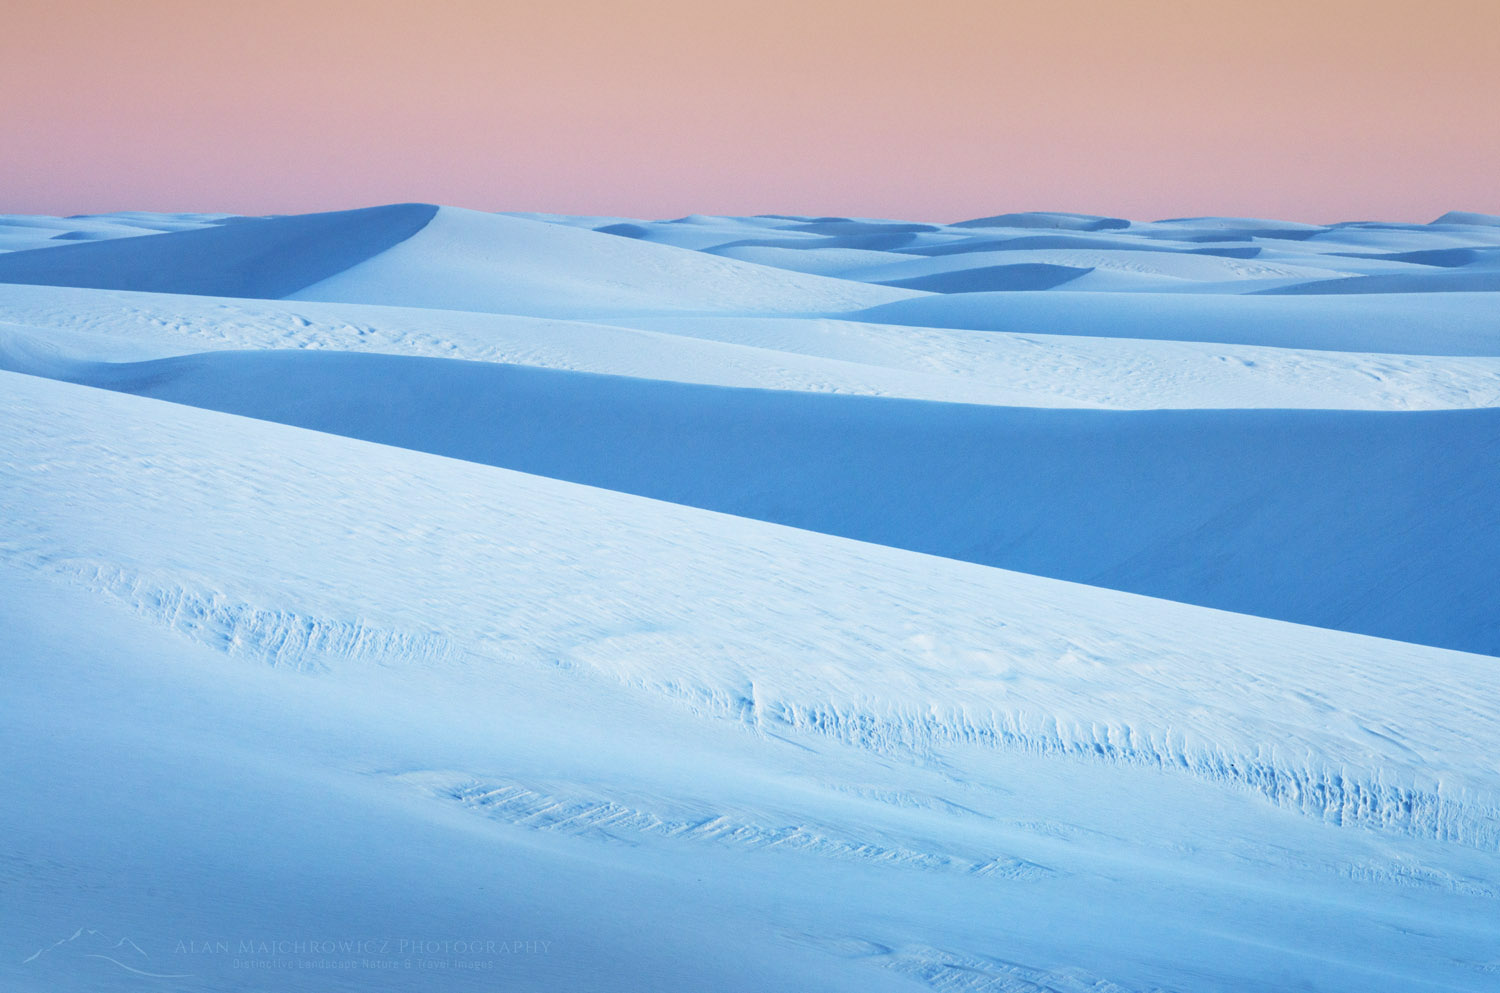 Alpenglow over Gypsum sand dunes, White Sands National Park, New Mexico #57153